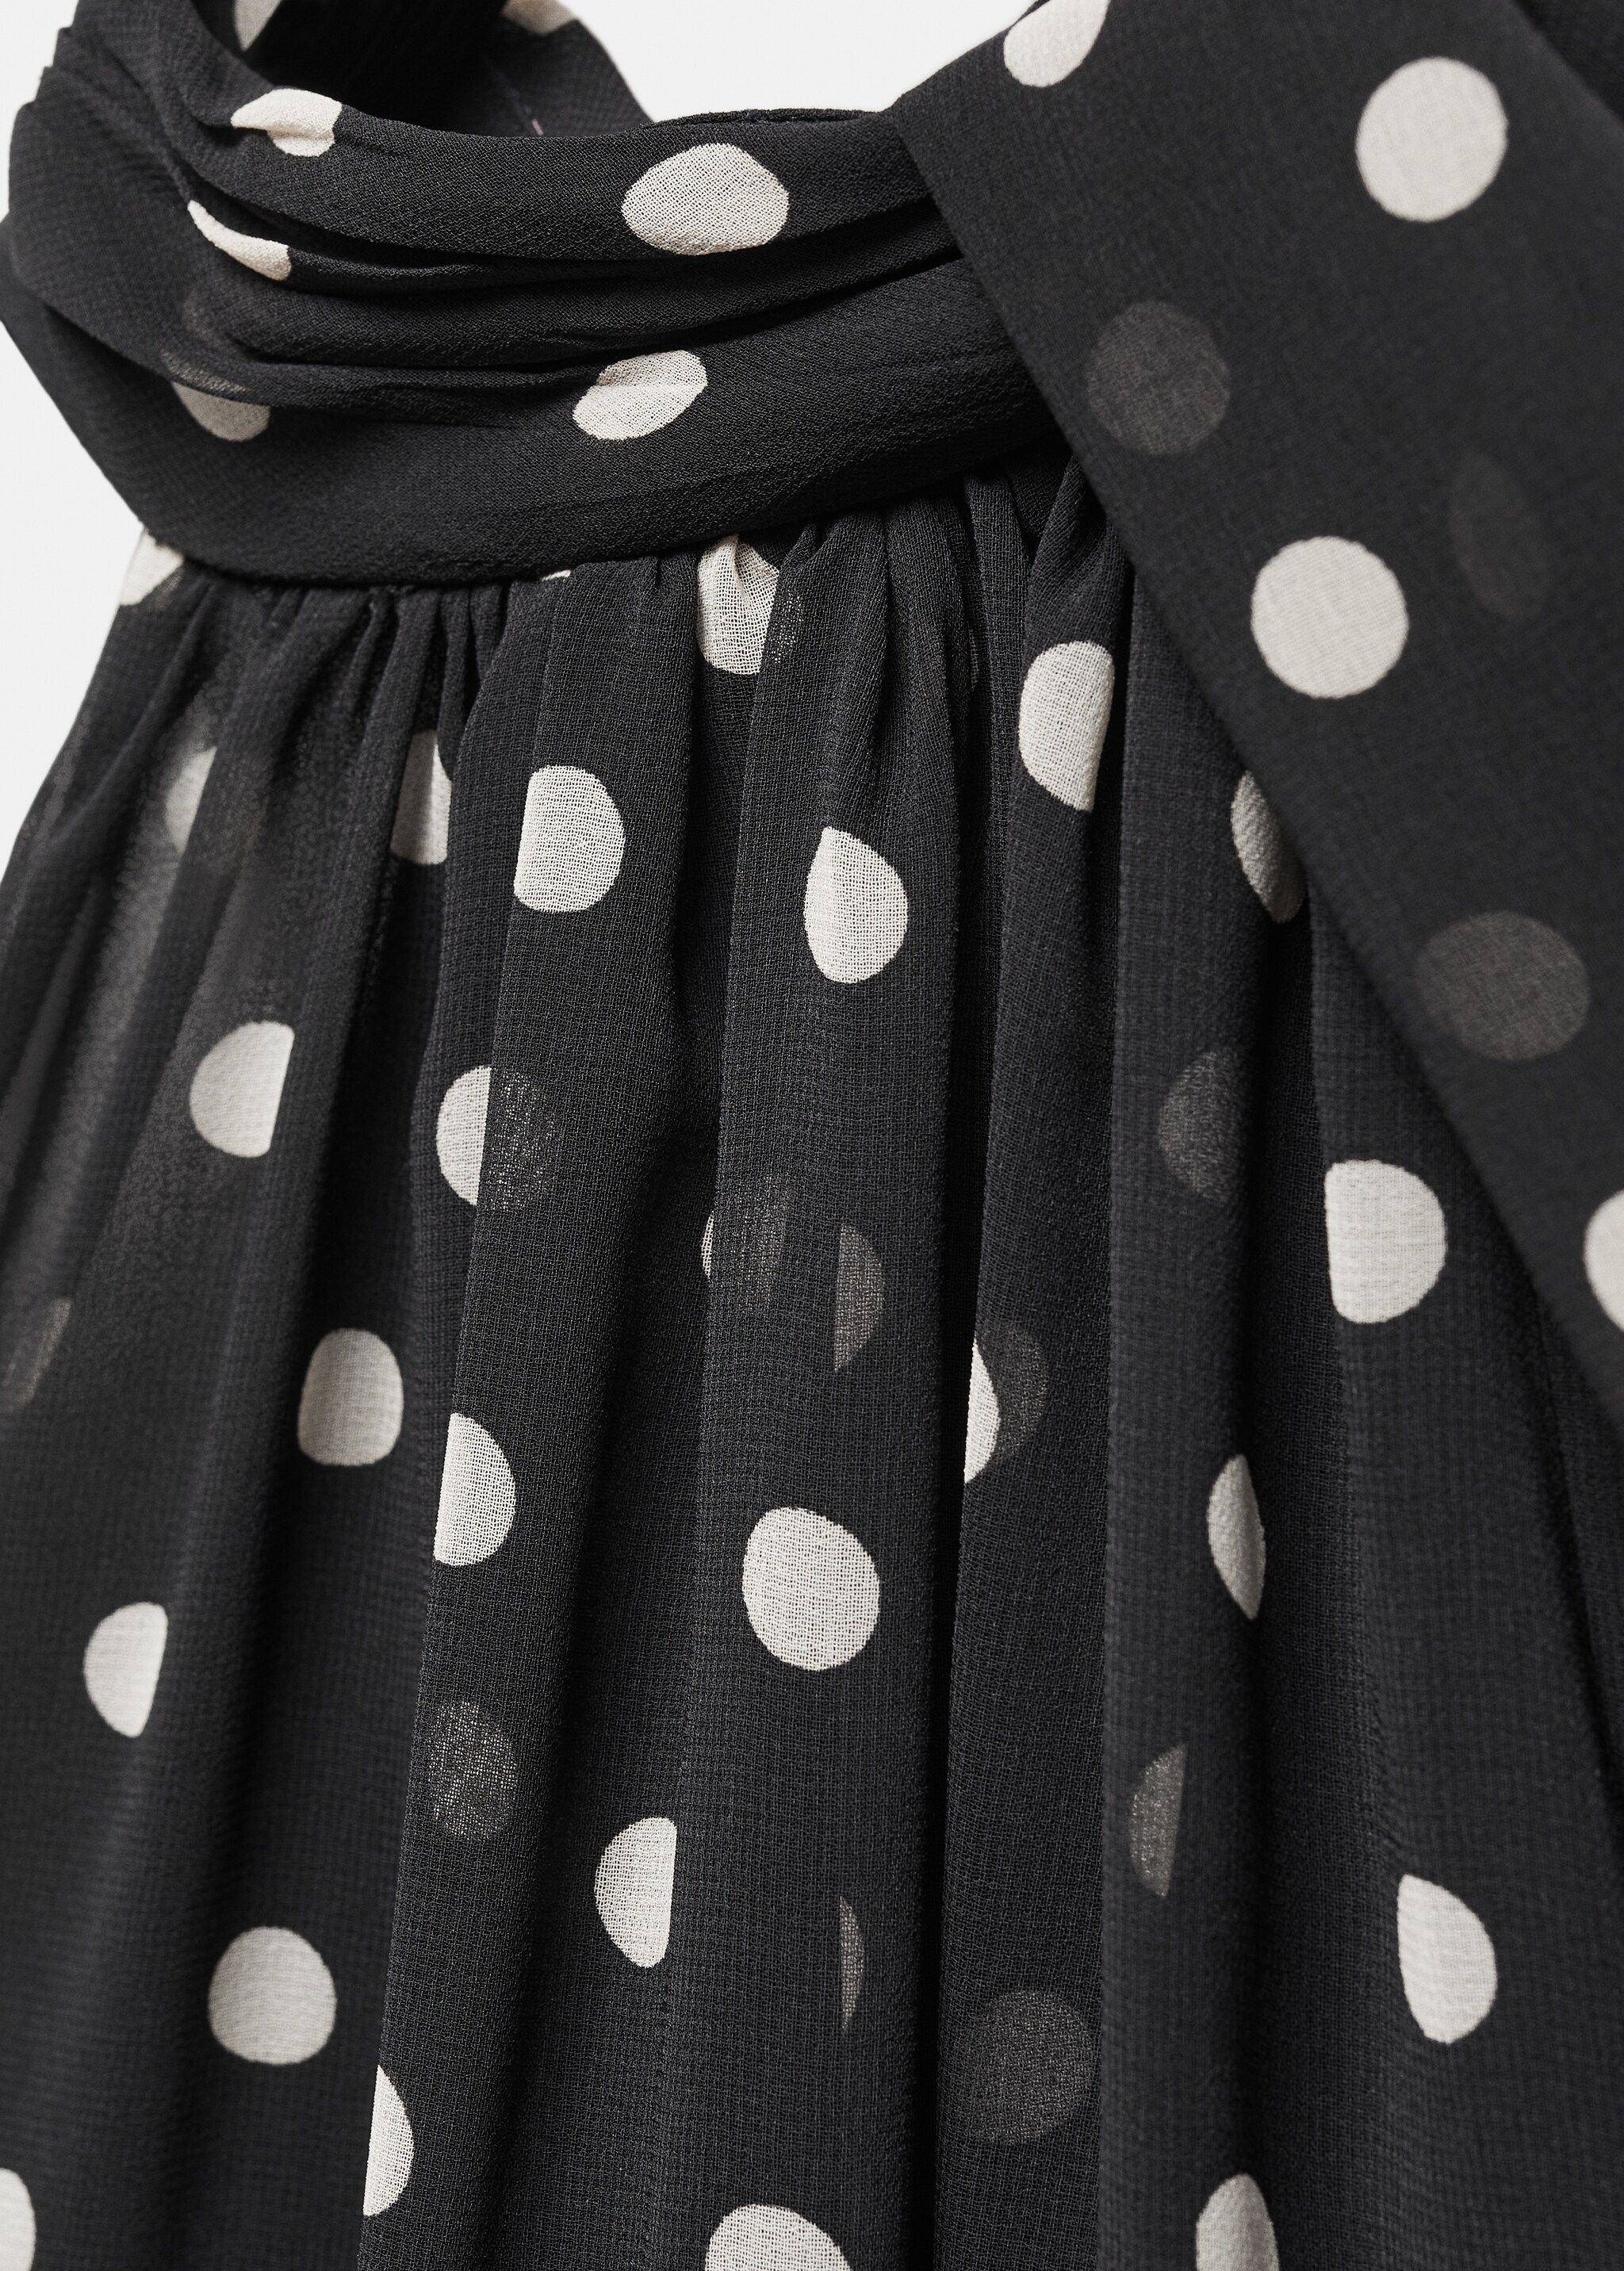 Asymmetric polka dot blouse - Details of the article 8